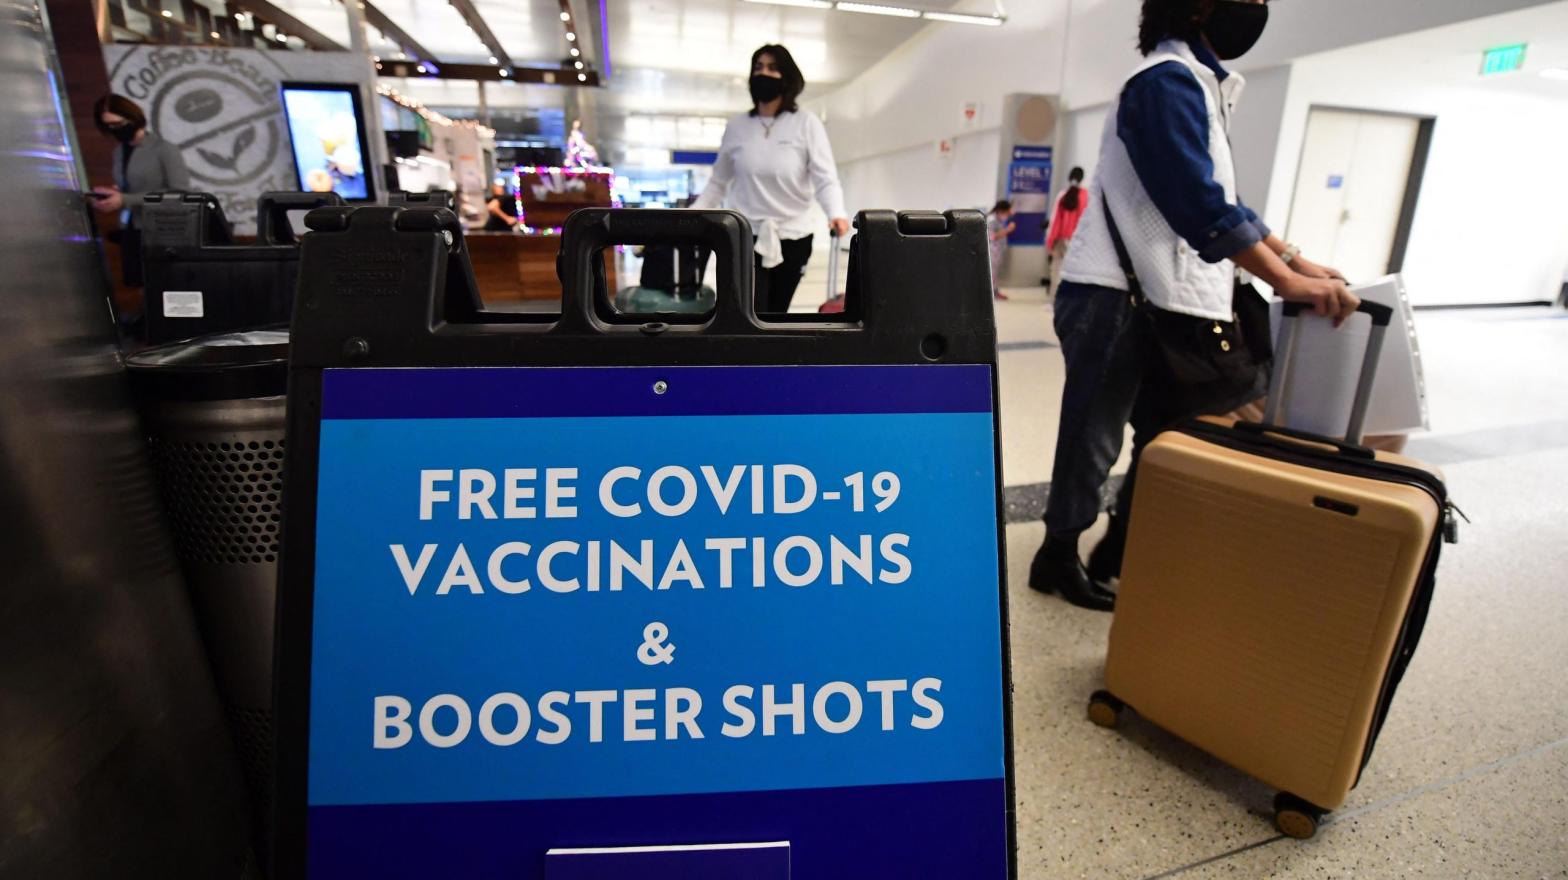 Travellers walk past a sign offering free Covid-19 vaccinations and booster shots at a pop-up clinic in the international arrivals area of Los Angeles International Airport in Los Angeles, California on December 22, 2021. (Image: Frederic J. Brown/AFP, Getty Images)